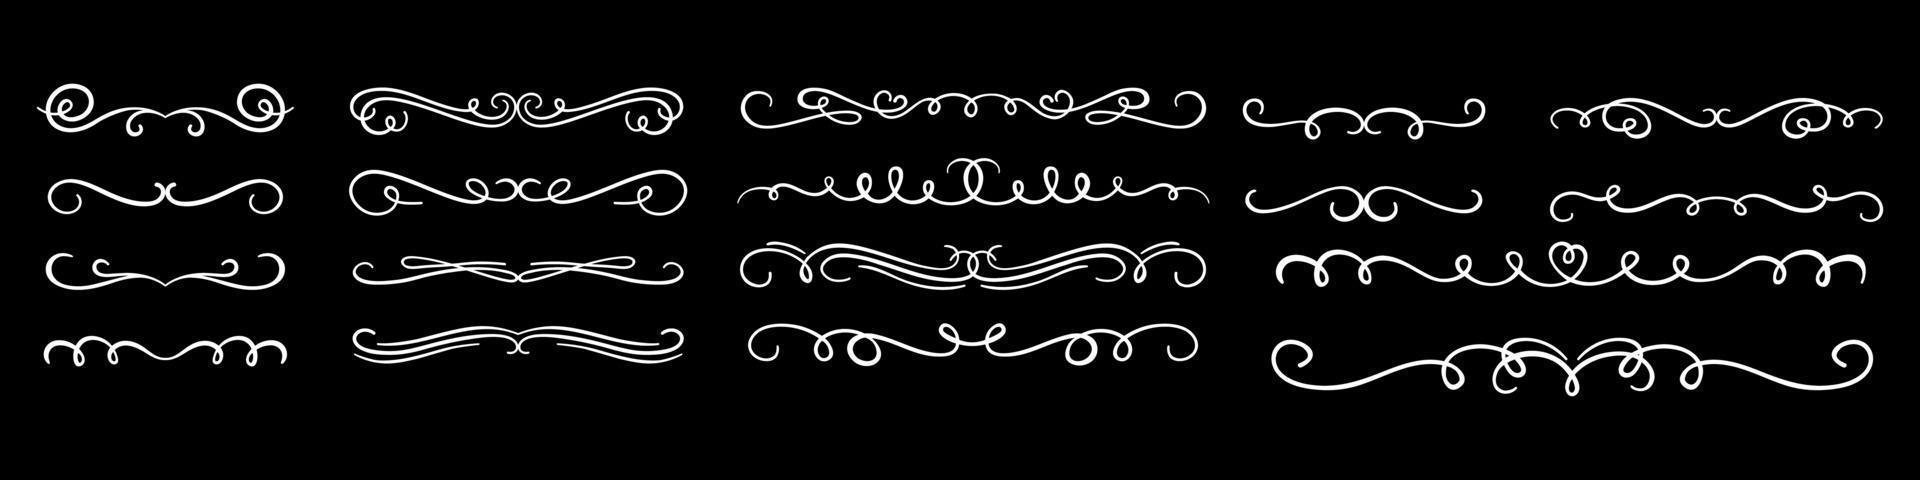 Curled calligraphic design elements for logo vector